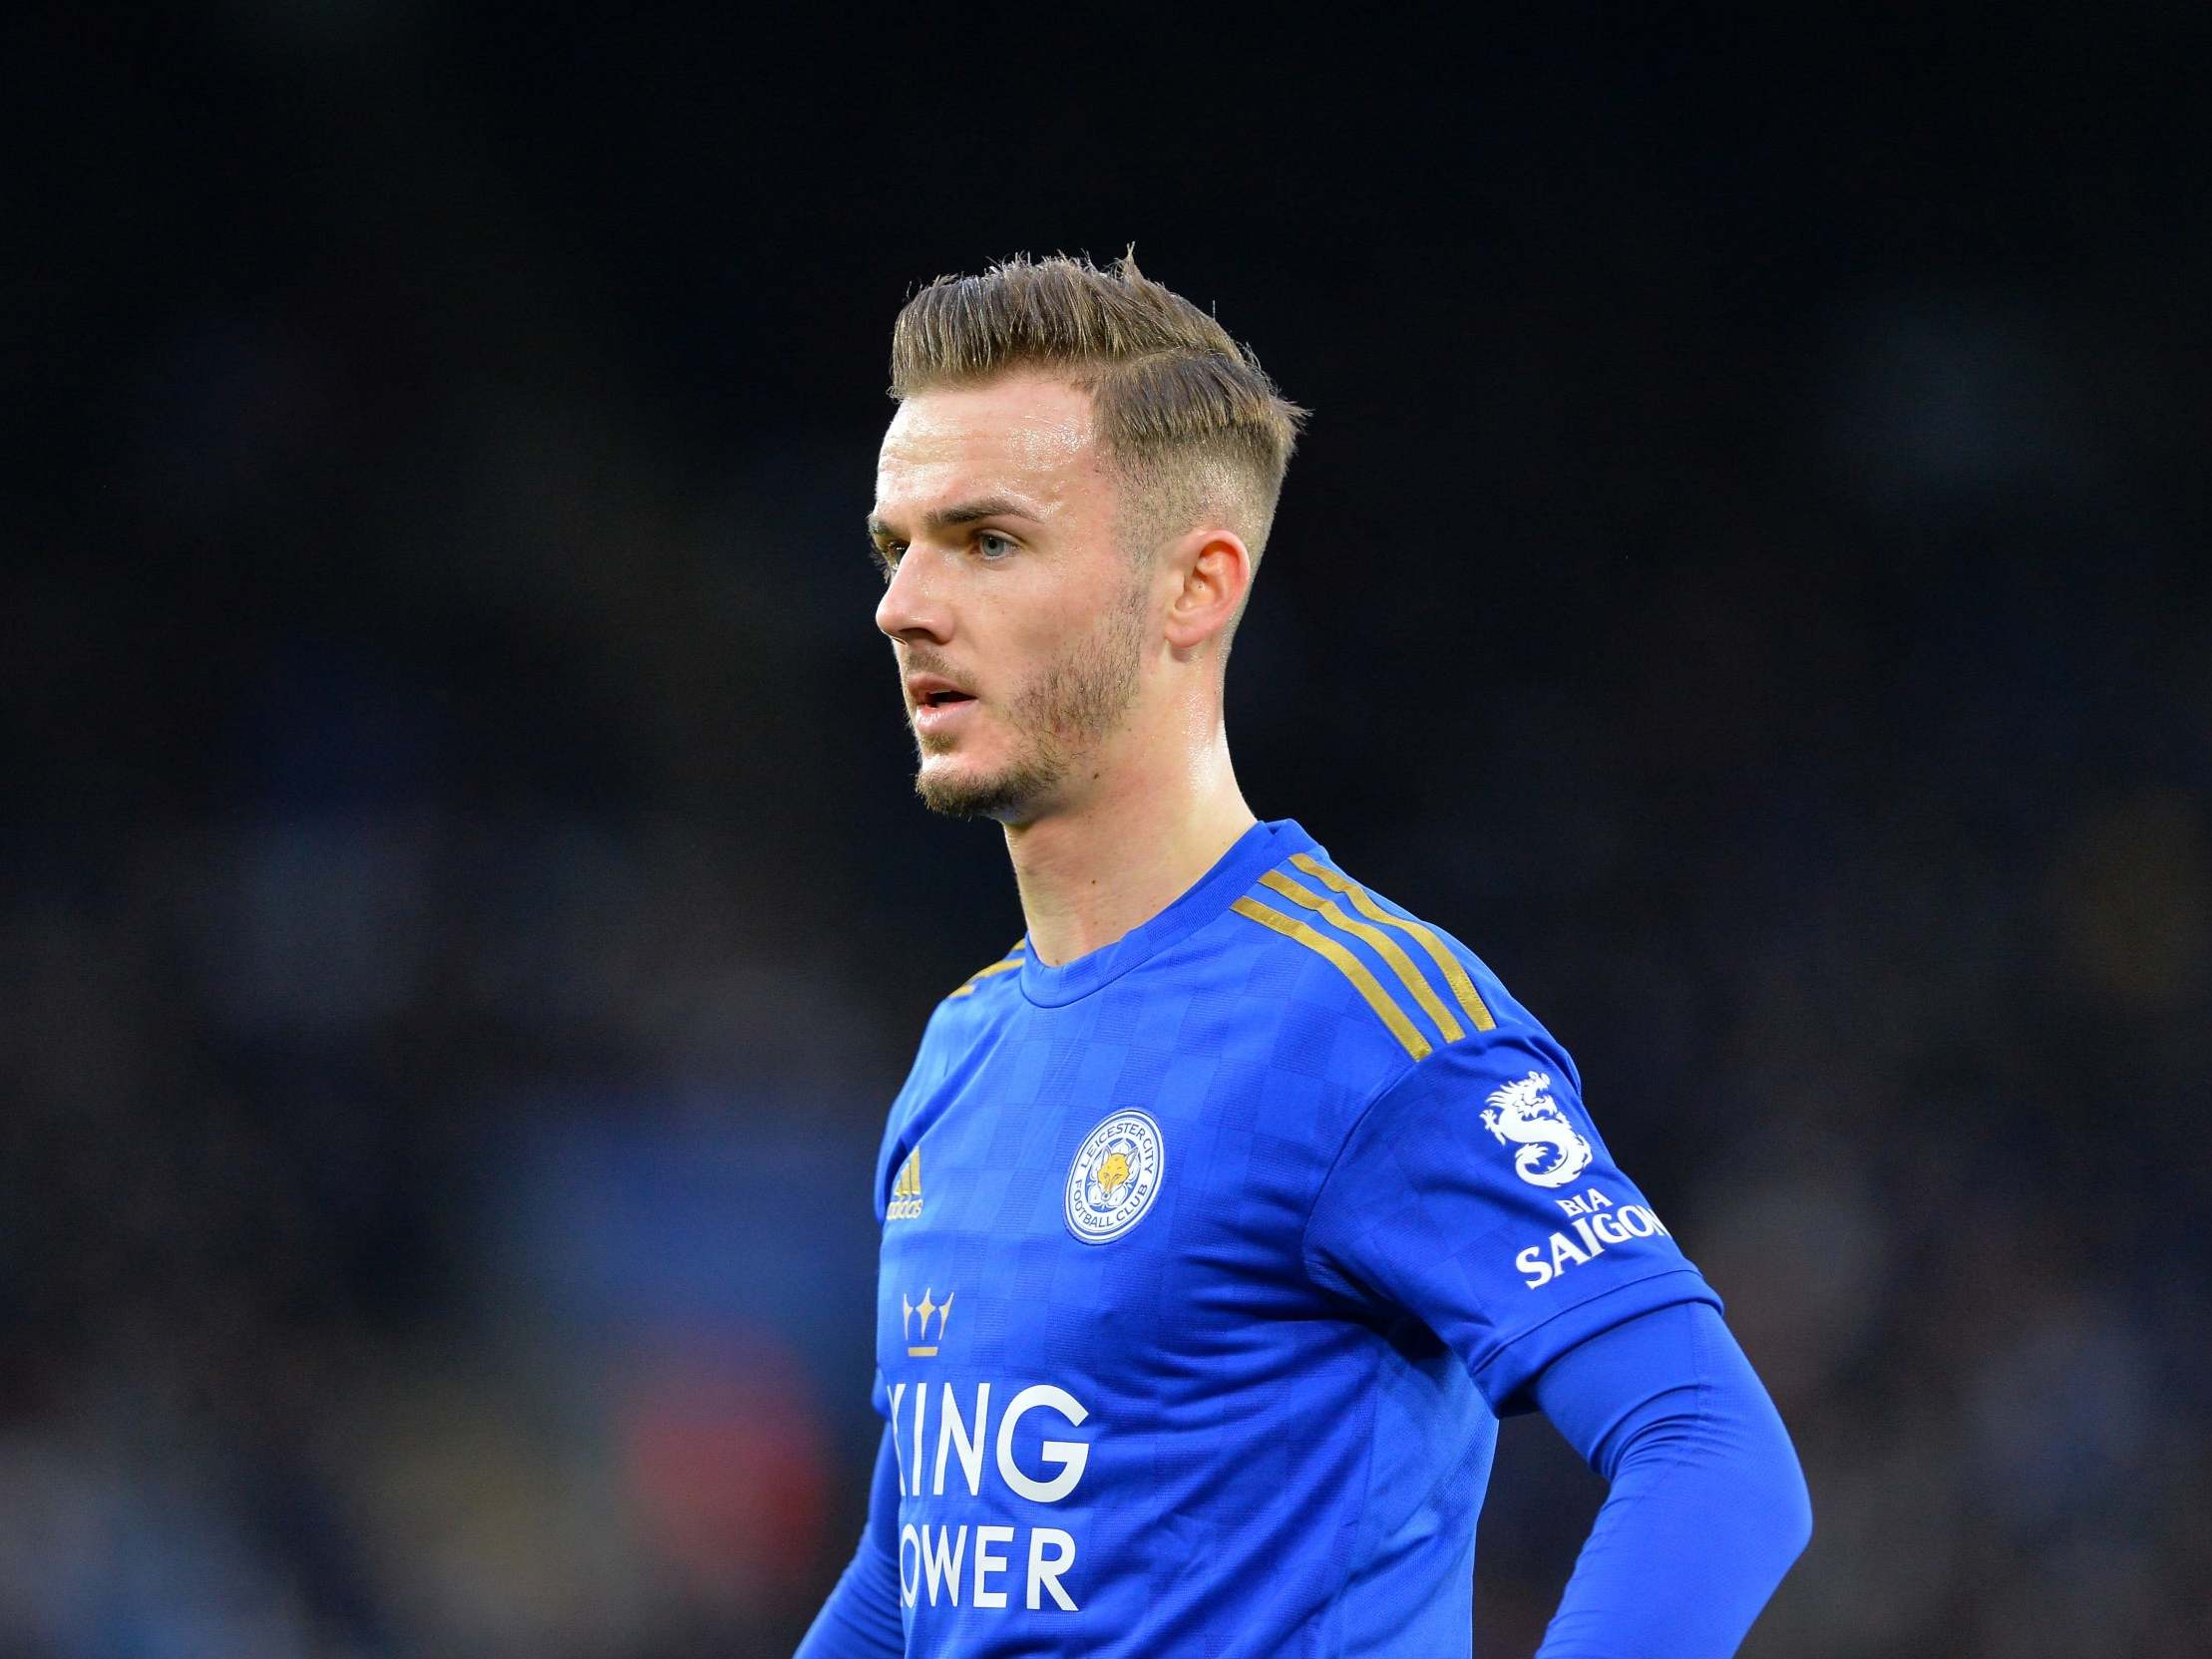 James Maddison's contract at Leicester runs until the summer of 2023